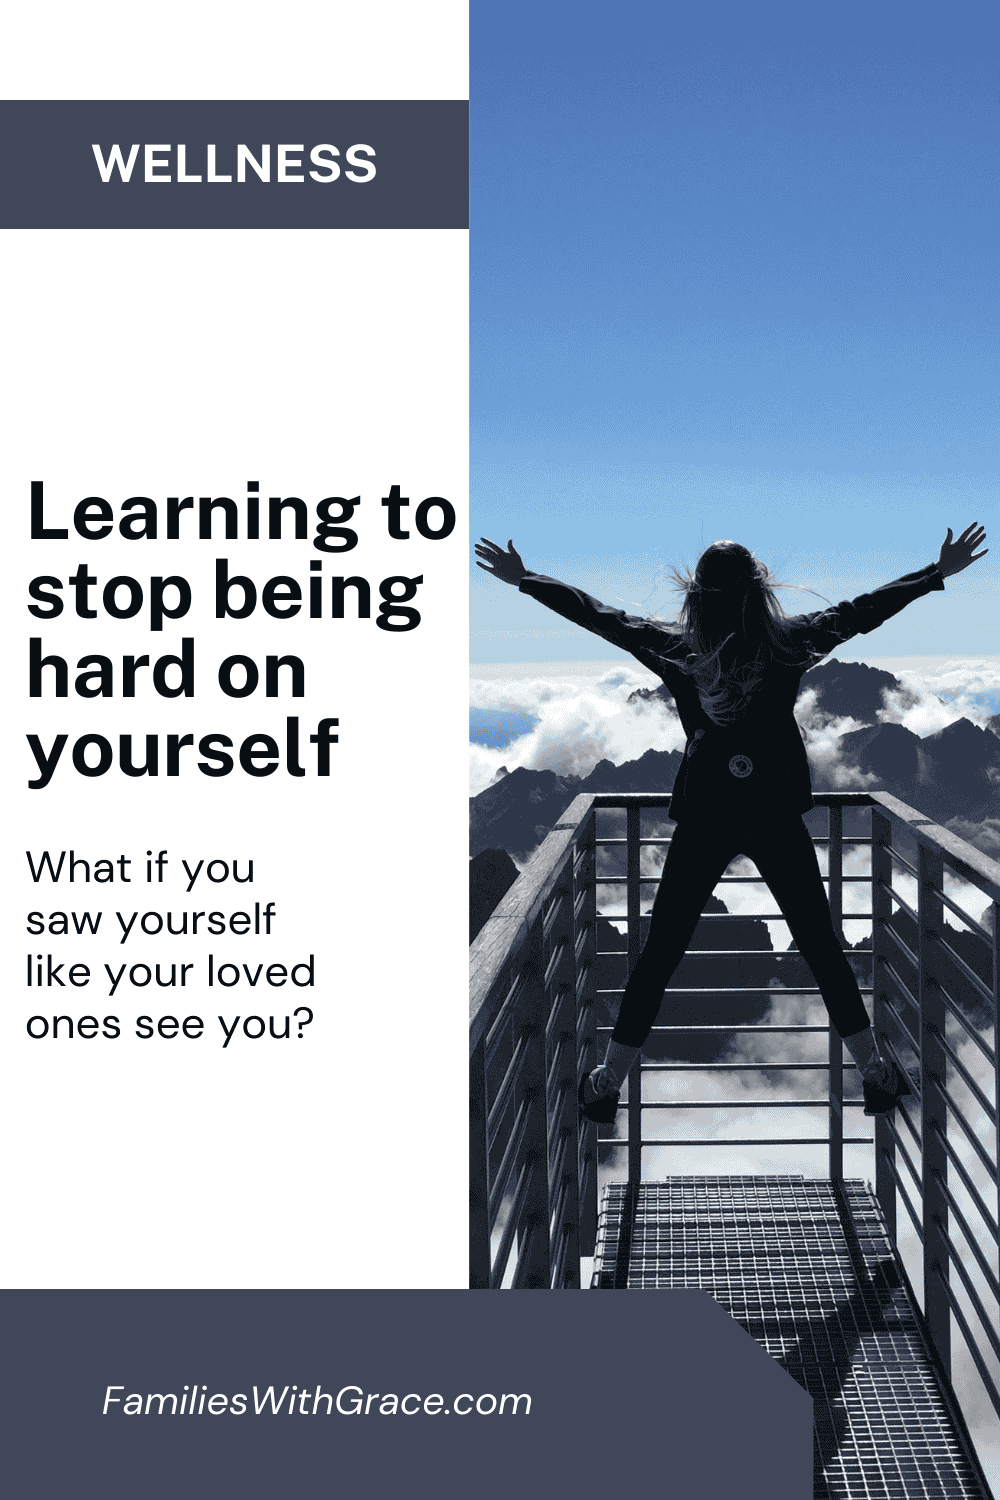 Learning to stop being hard on yourself